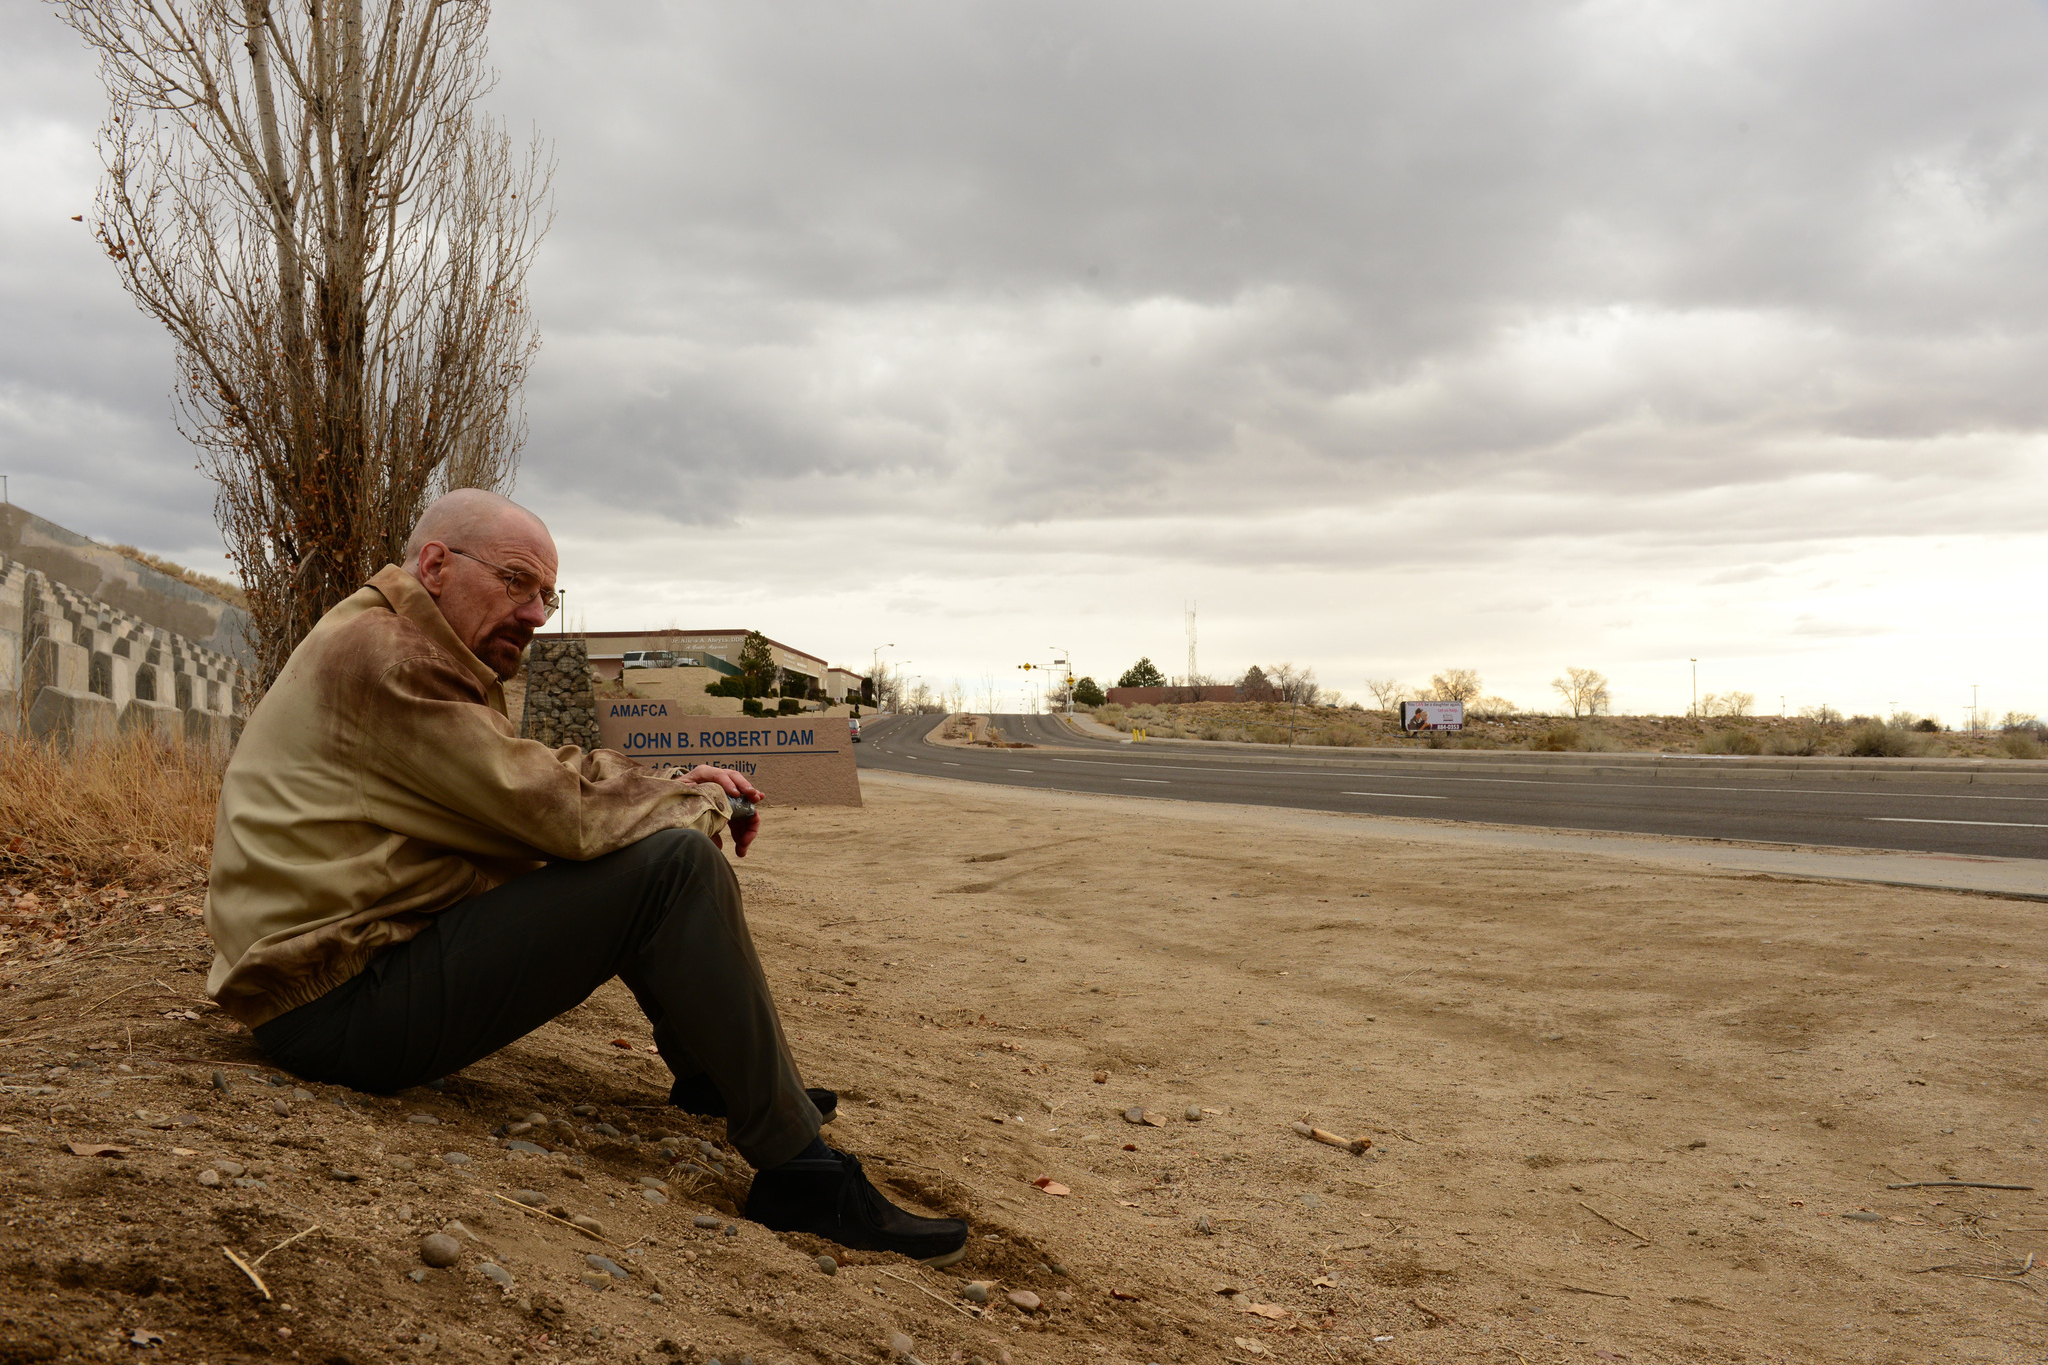 Walter White sits by the side of the road in Breaking Bad season 5.